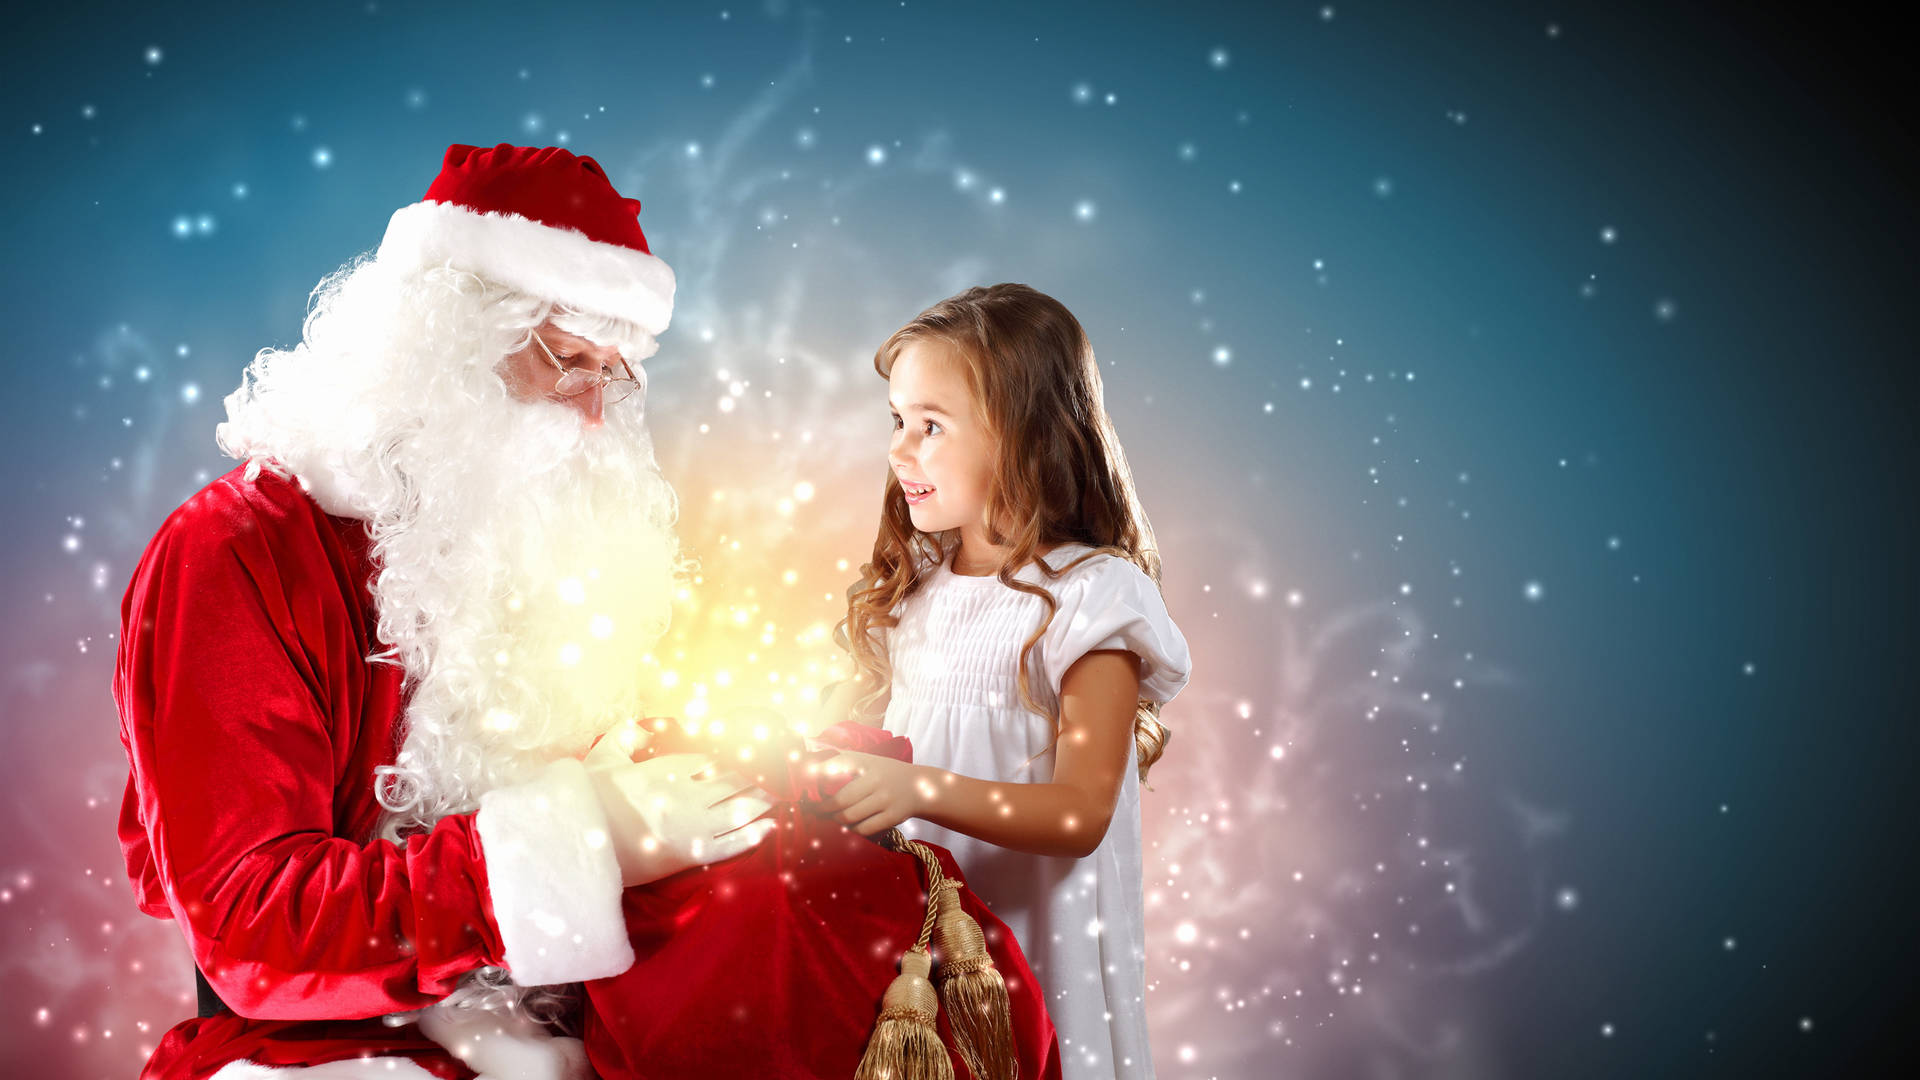 Santa Claus With Little Girl Background